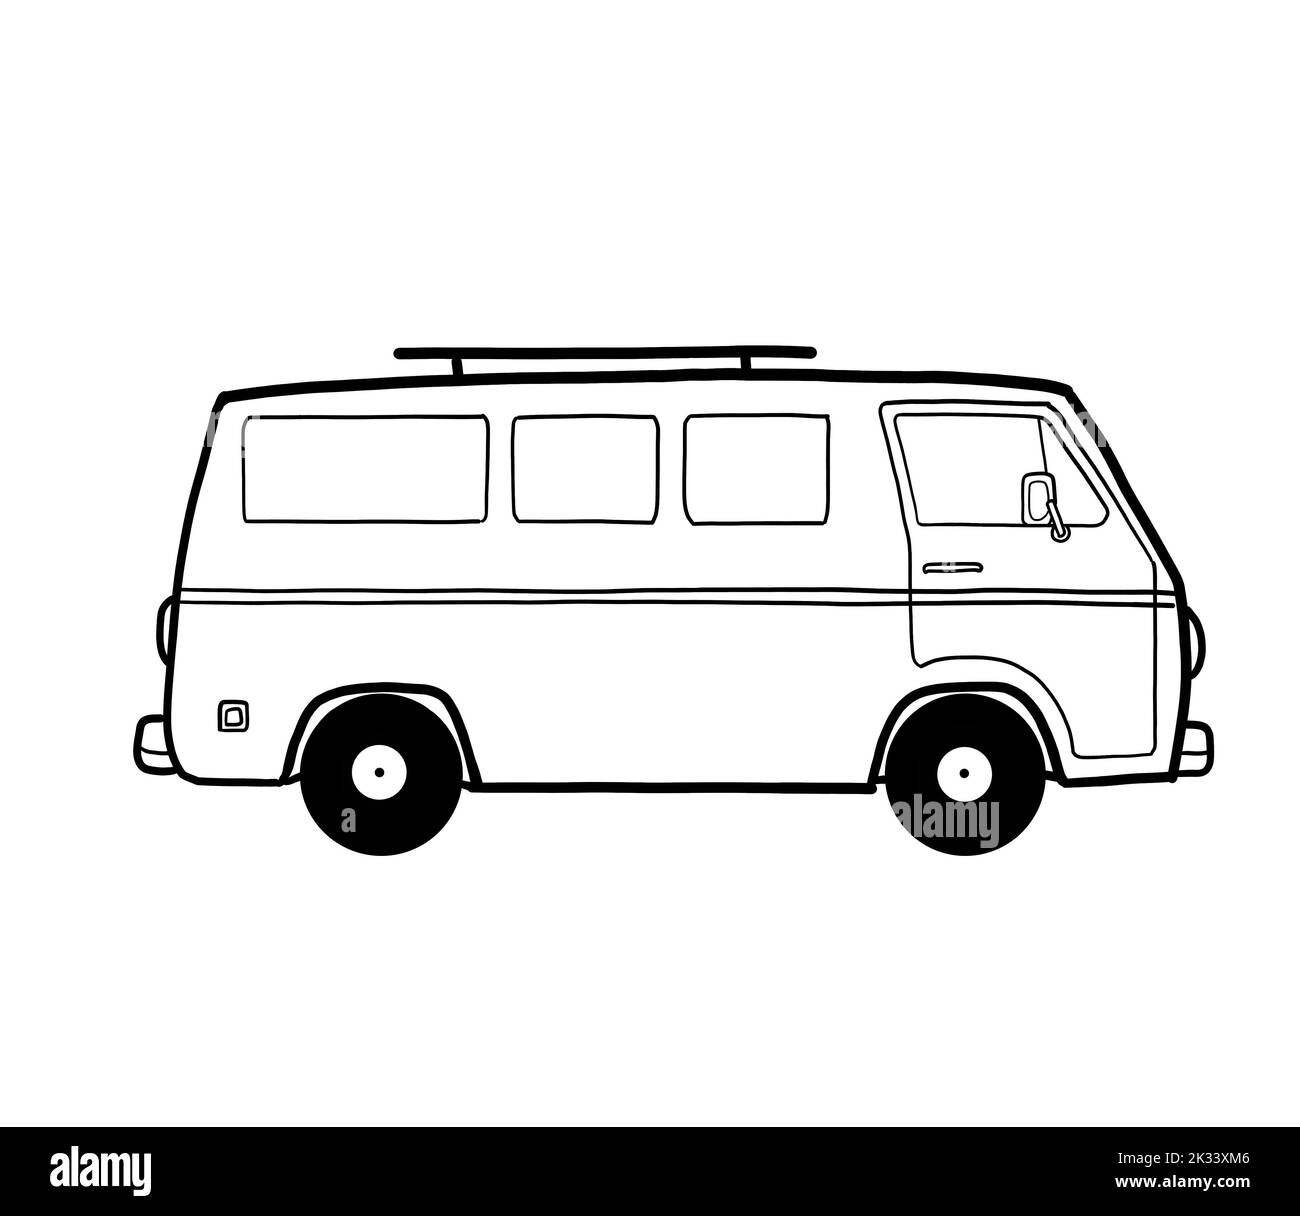 A black and white hand drawing of a camper van car vehicle or motorhome. Van life road trip freedom lifestyle. Stock Photo